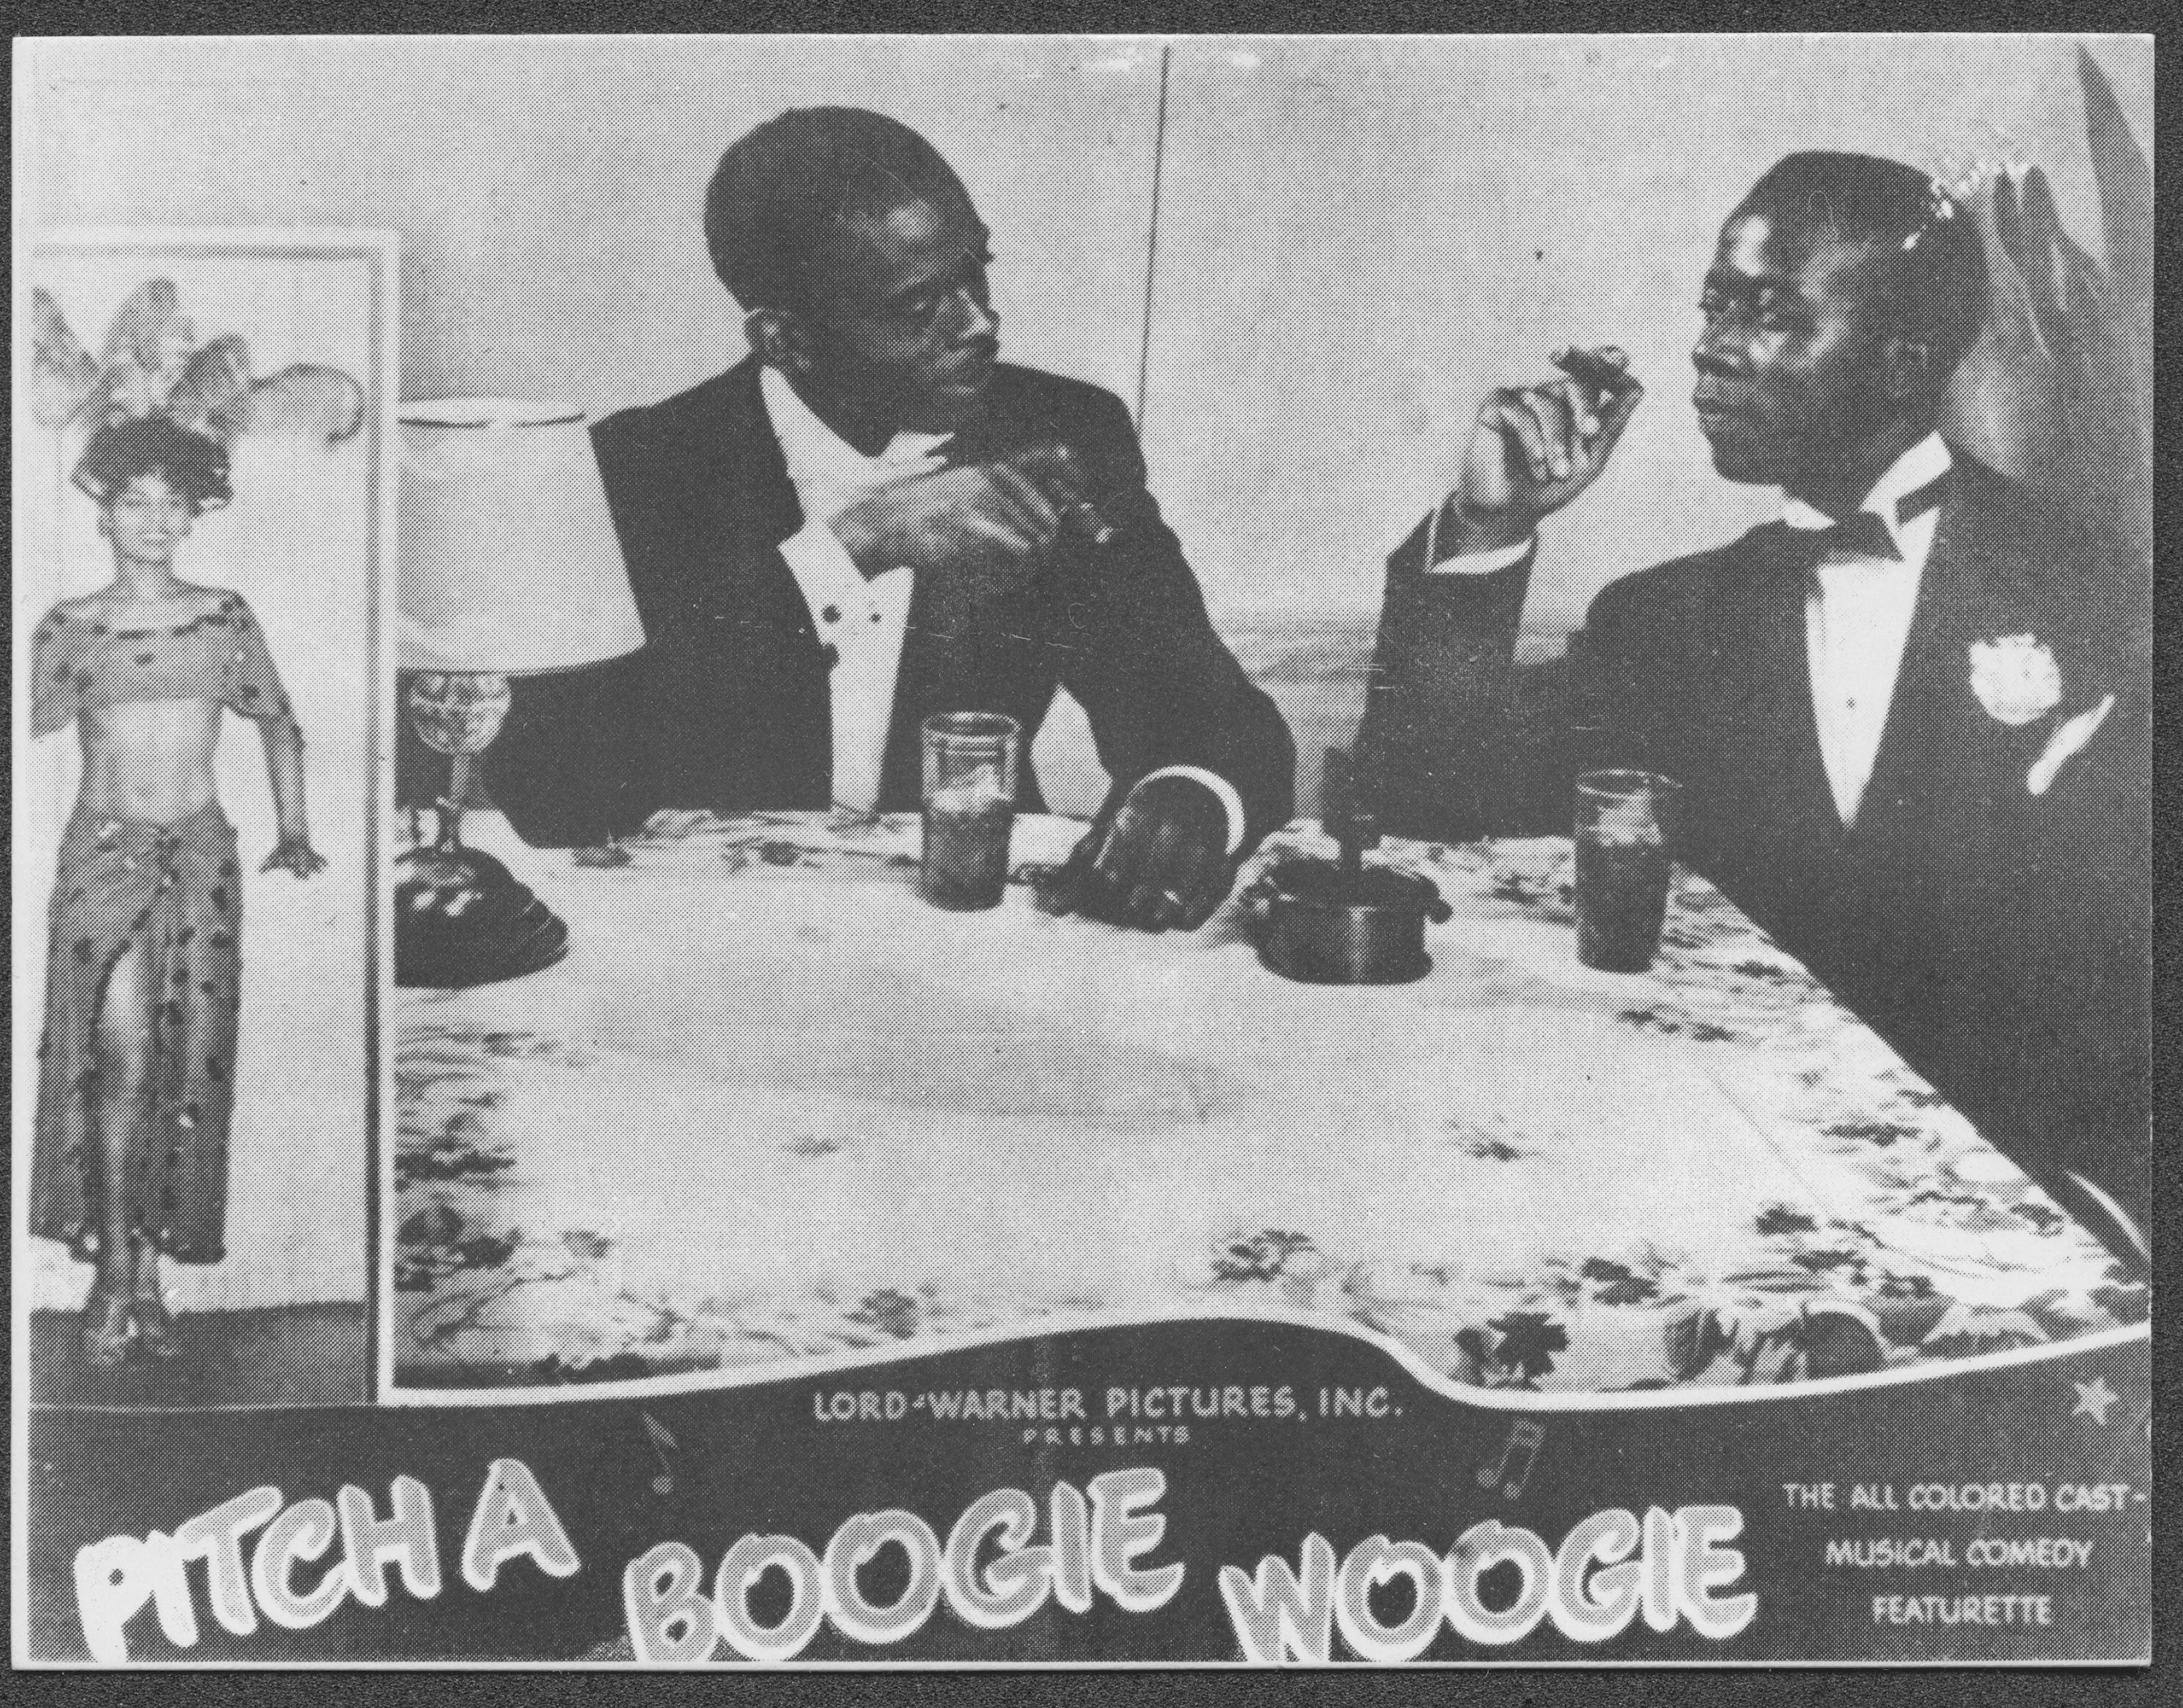 Lord-warner Pictures Inc Presents Pitch A Boogie Woogie - Ecu Digital Collections